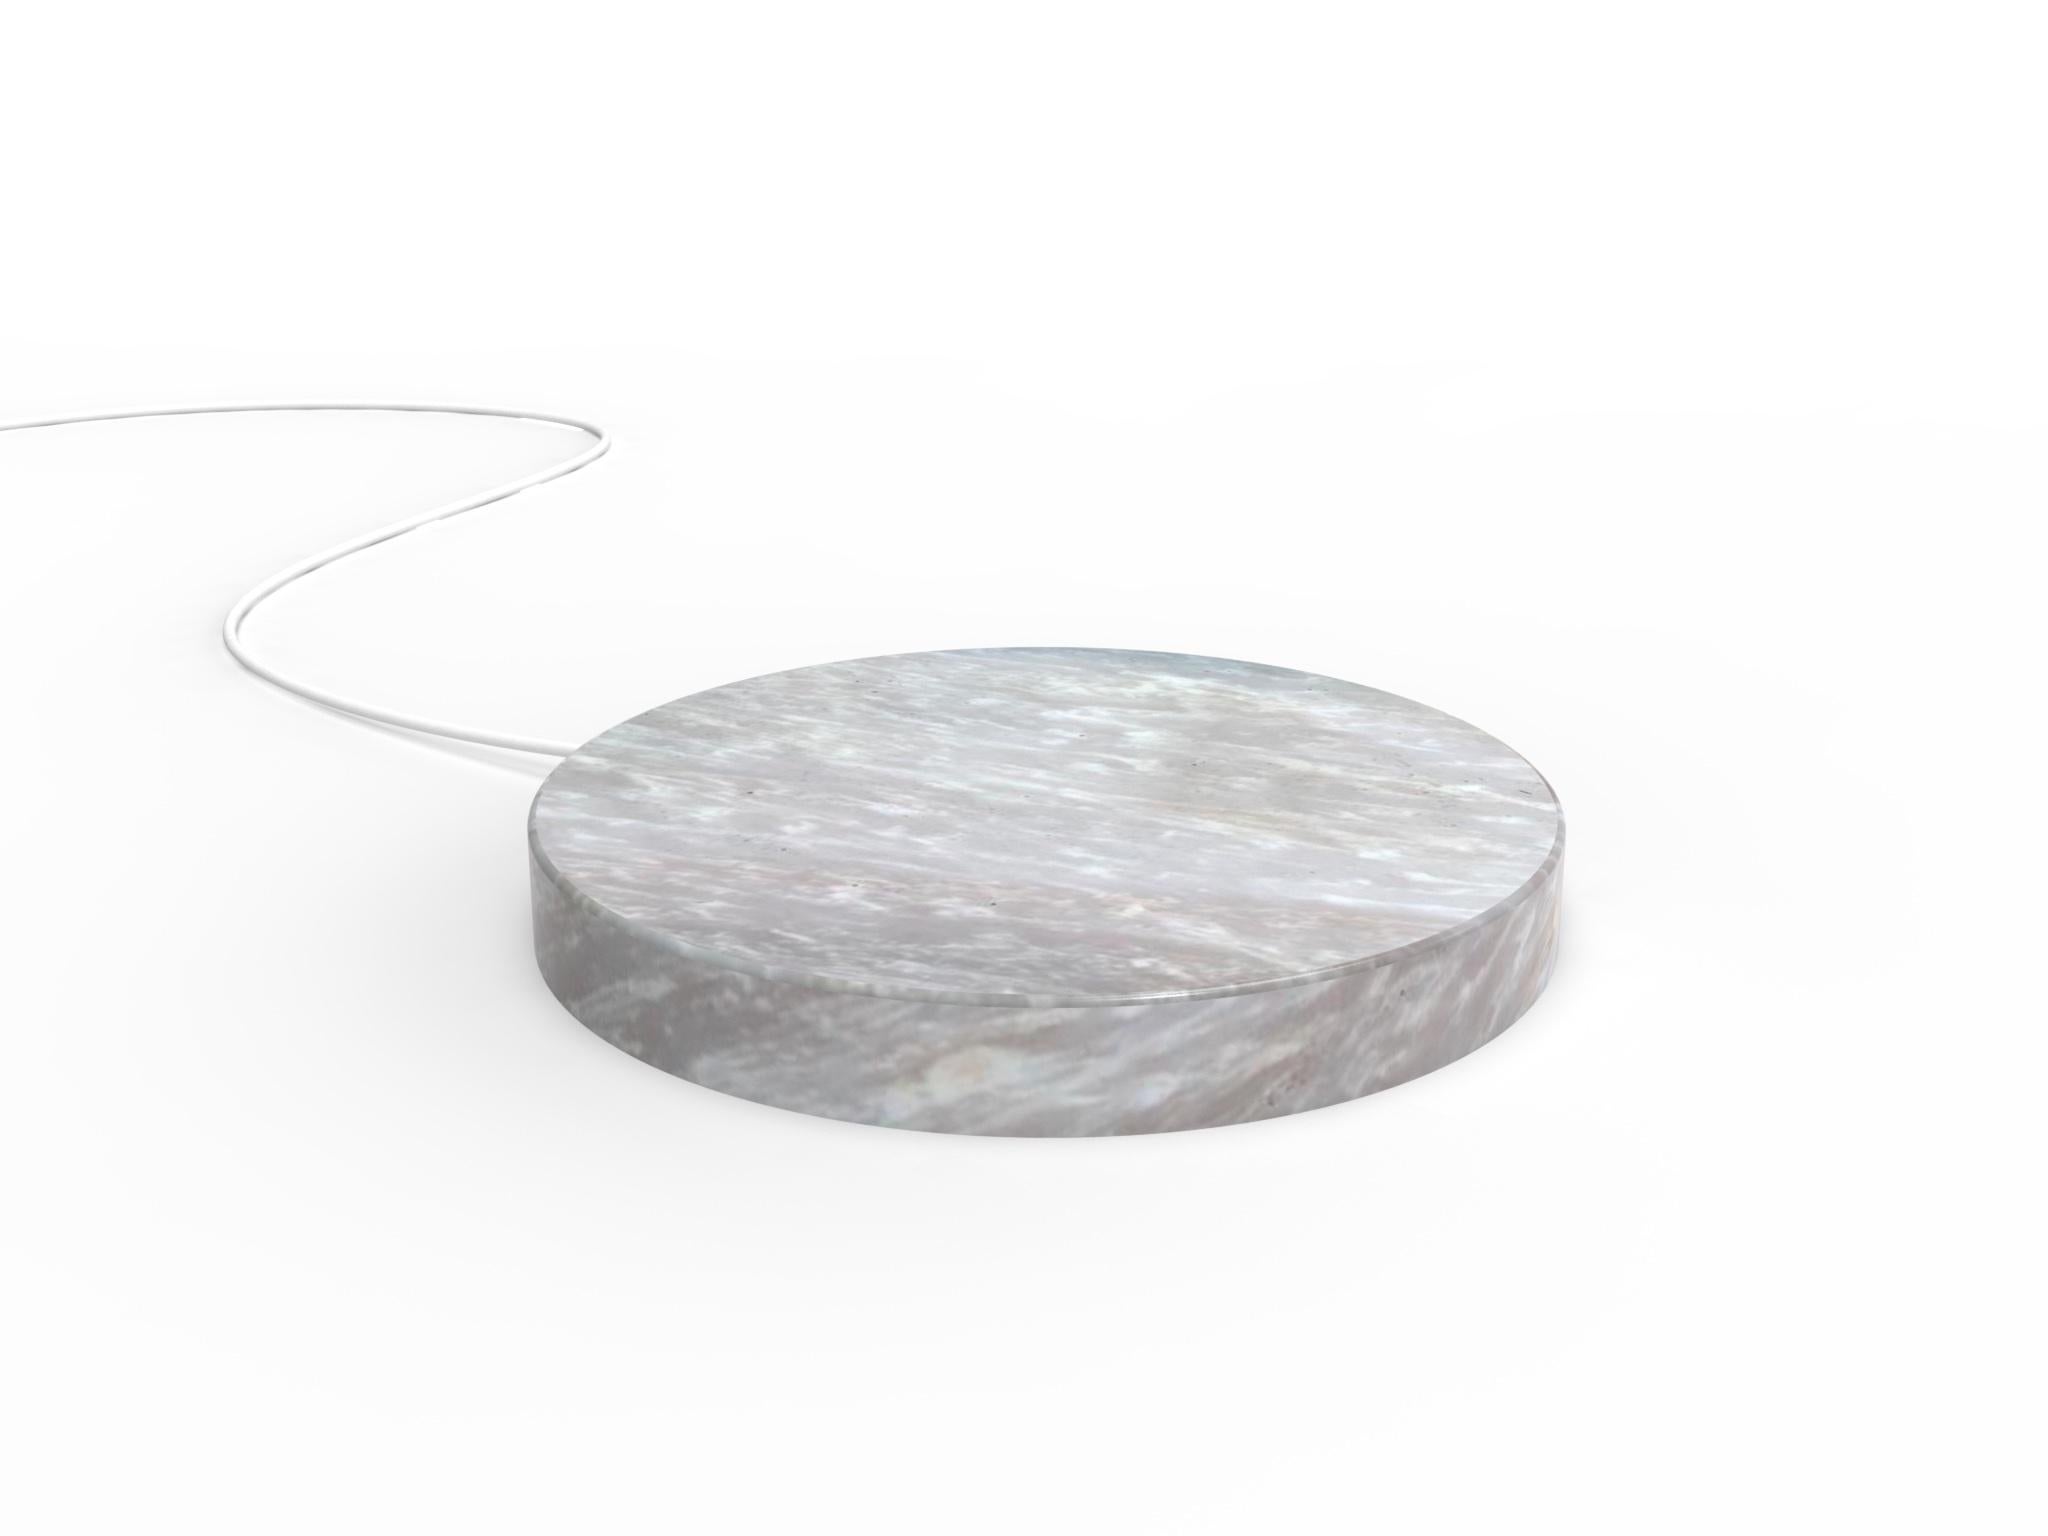 A Marble base,
that quickly charge your phone, with a touch of magic.
 
A circle, 
a stone, 
realized with the care that Marble requires.

A powerful wireless charging technology ensures an efficient and reliable power delivery.

The result is a